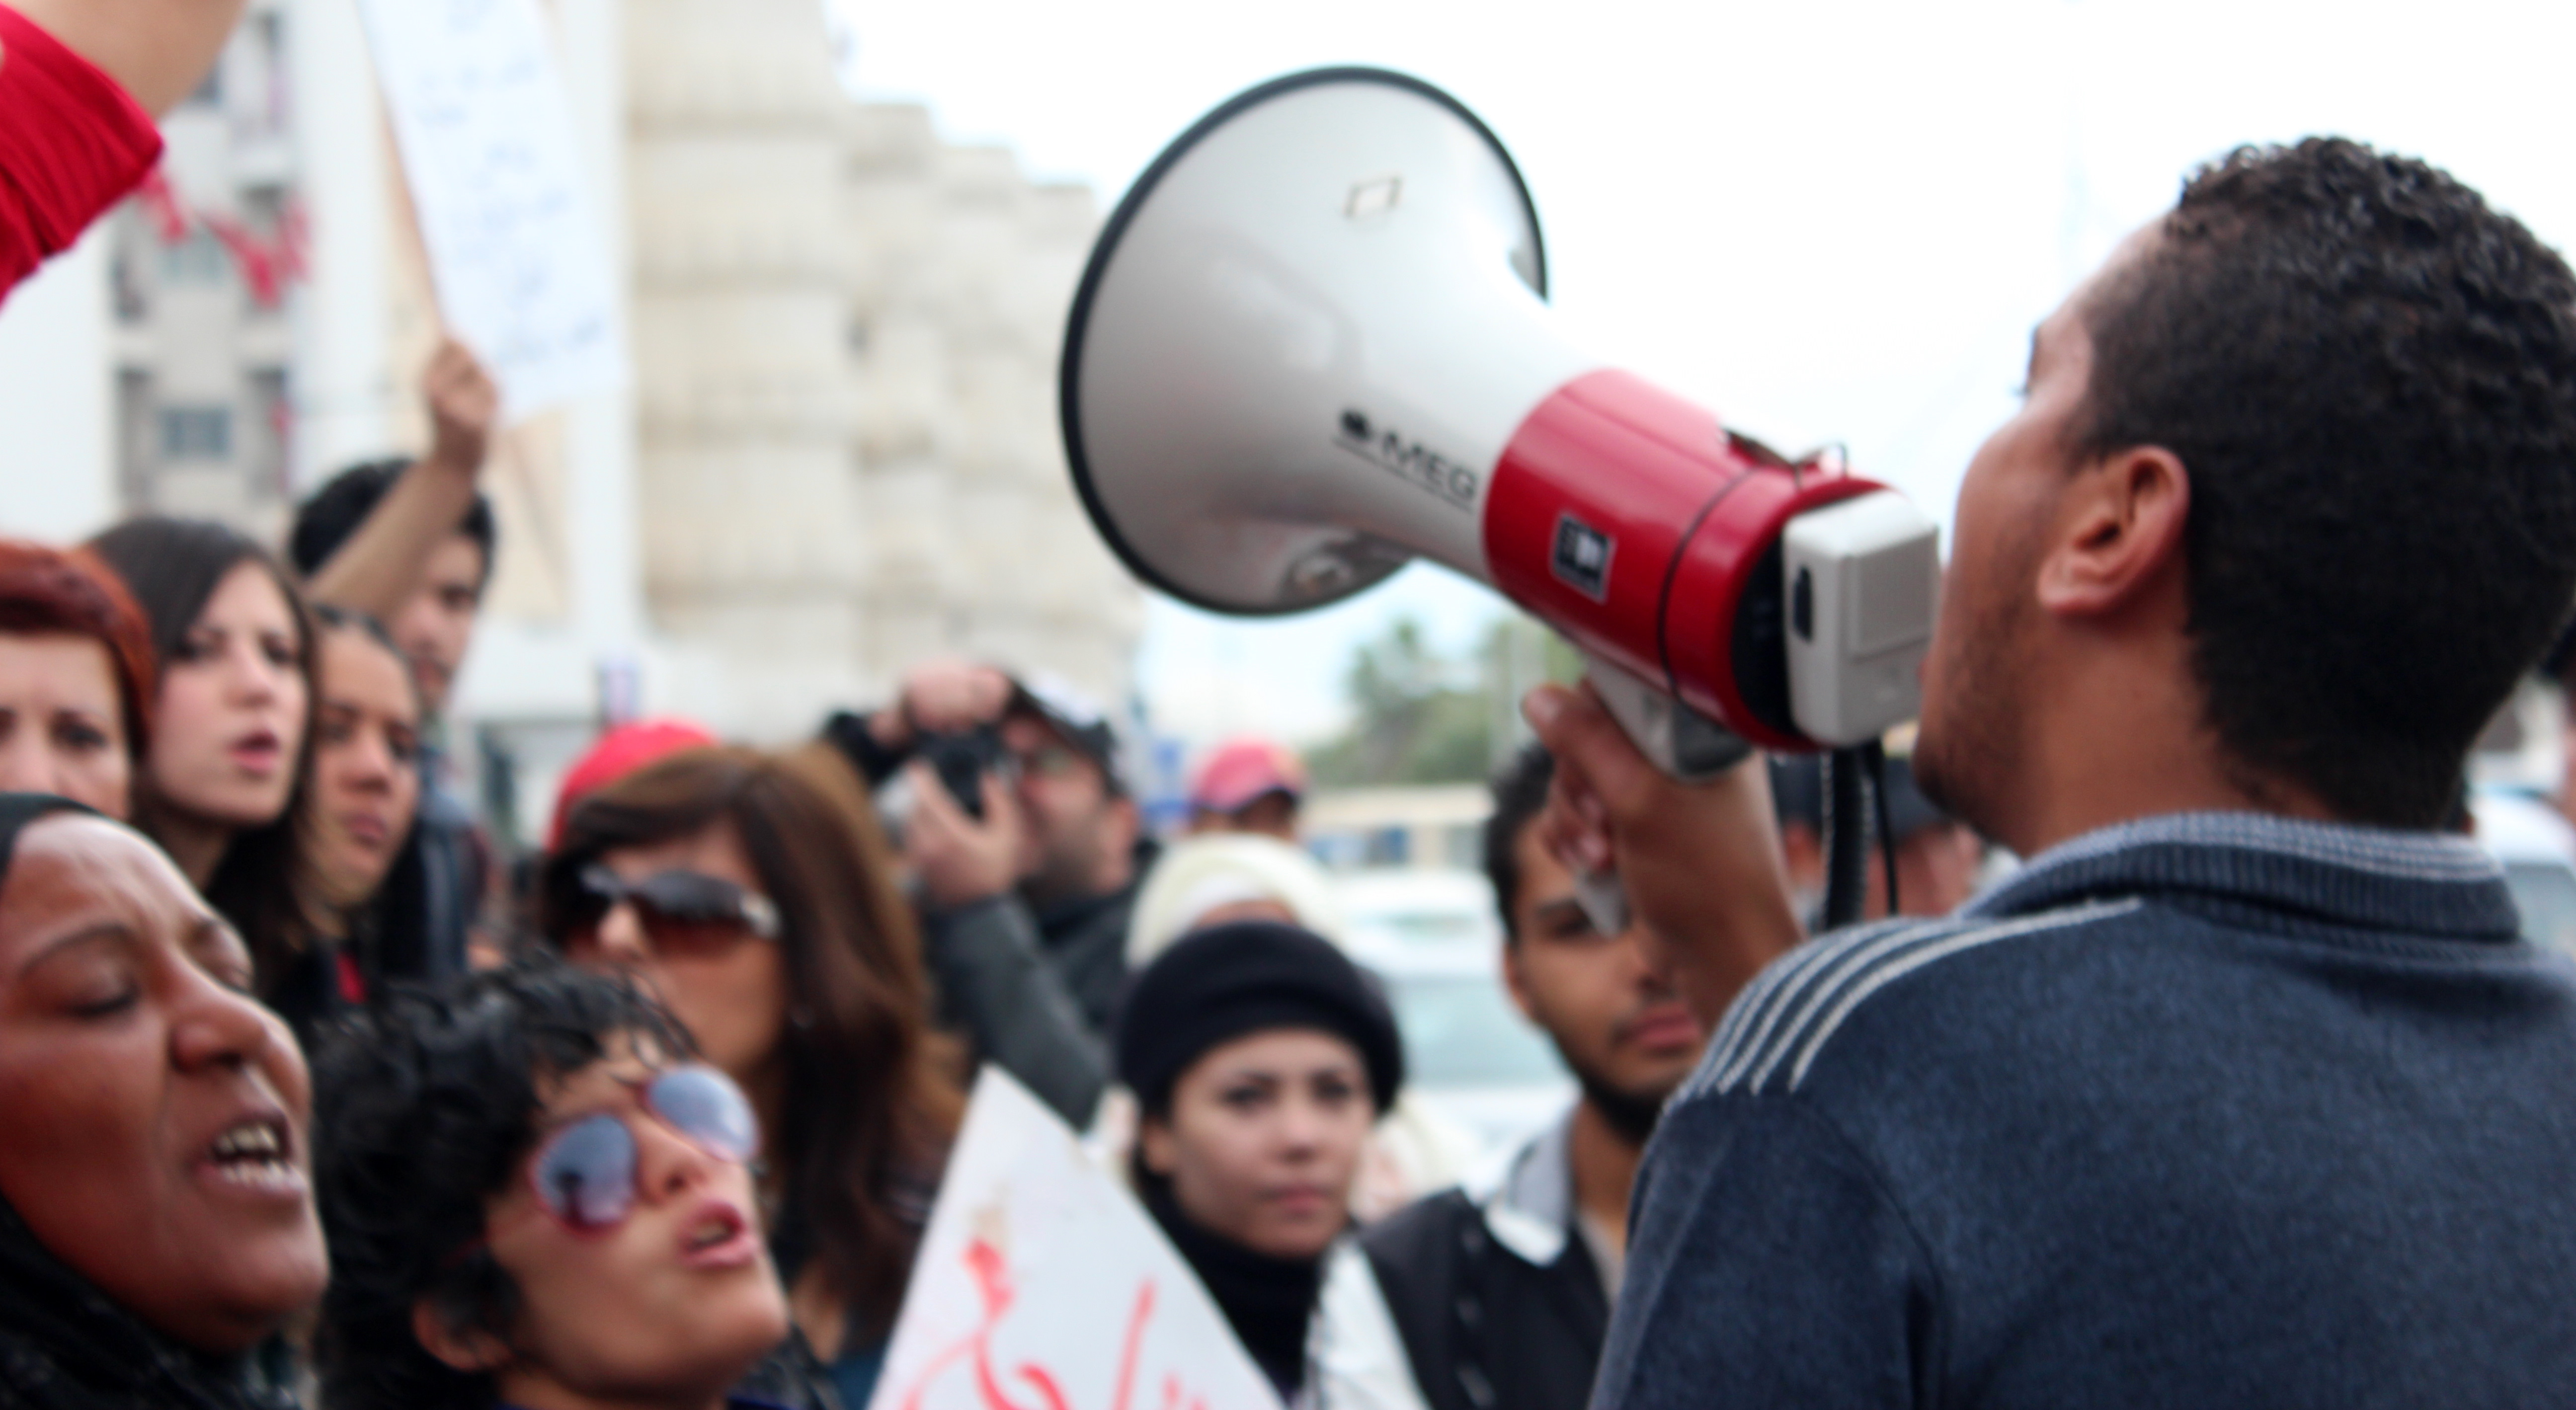 Man faces away from camera, holding a white and red bullhorn. People stand in front of him, seeming to speak along with him.